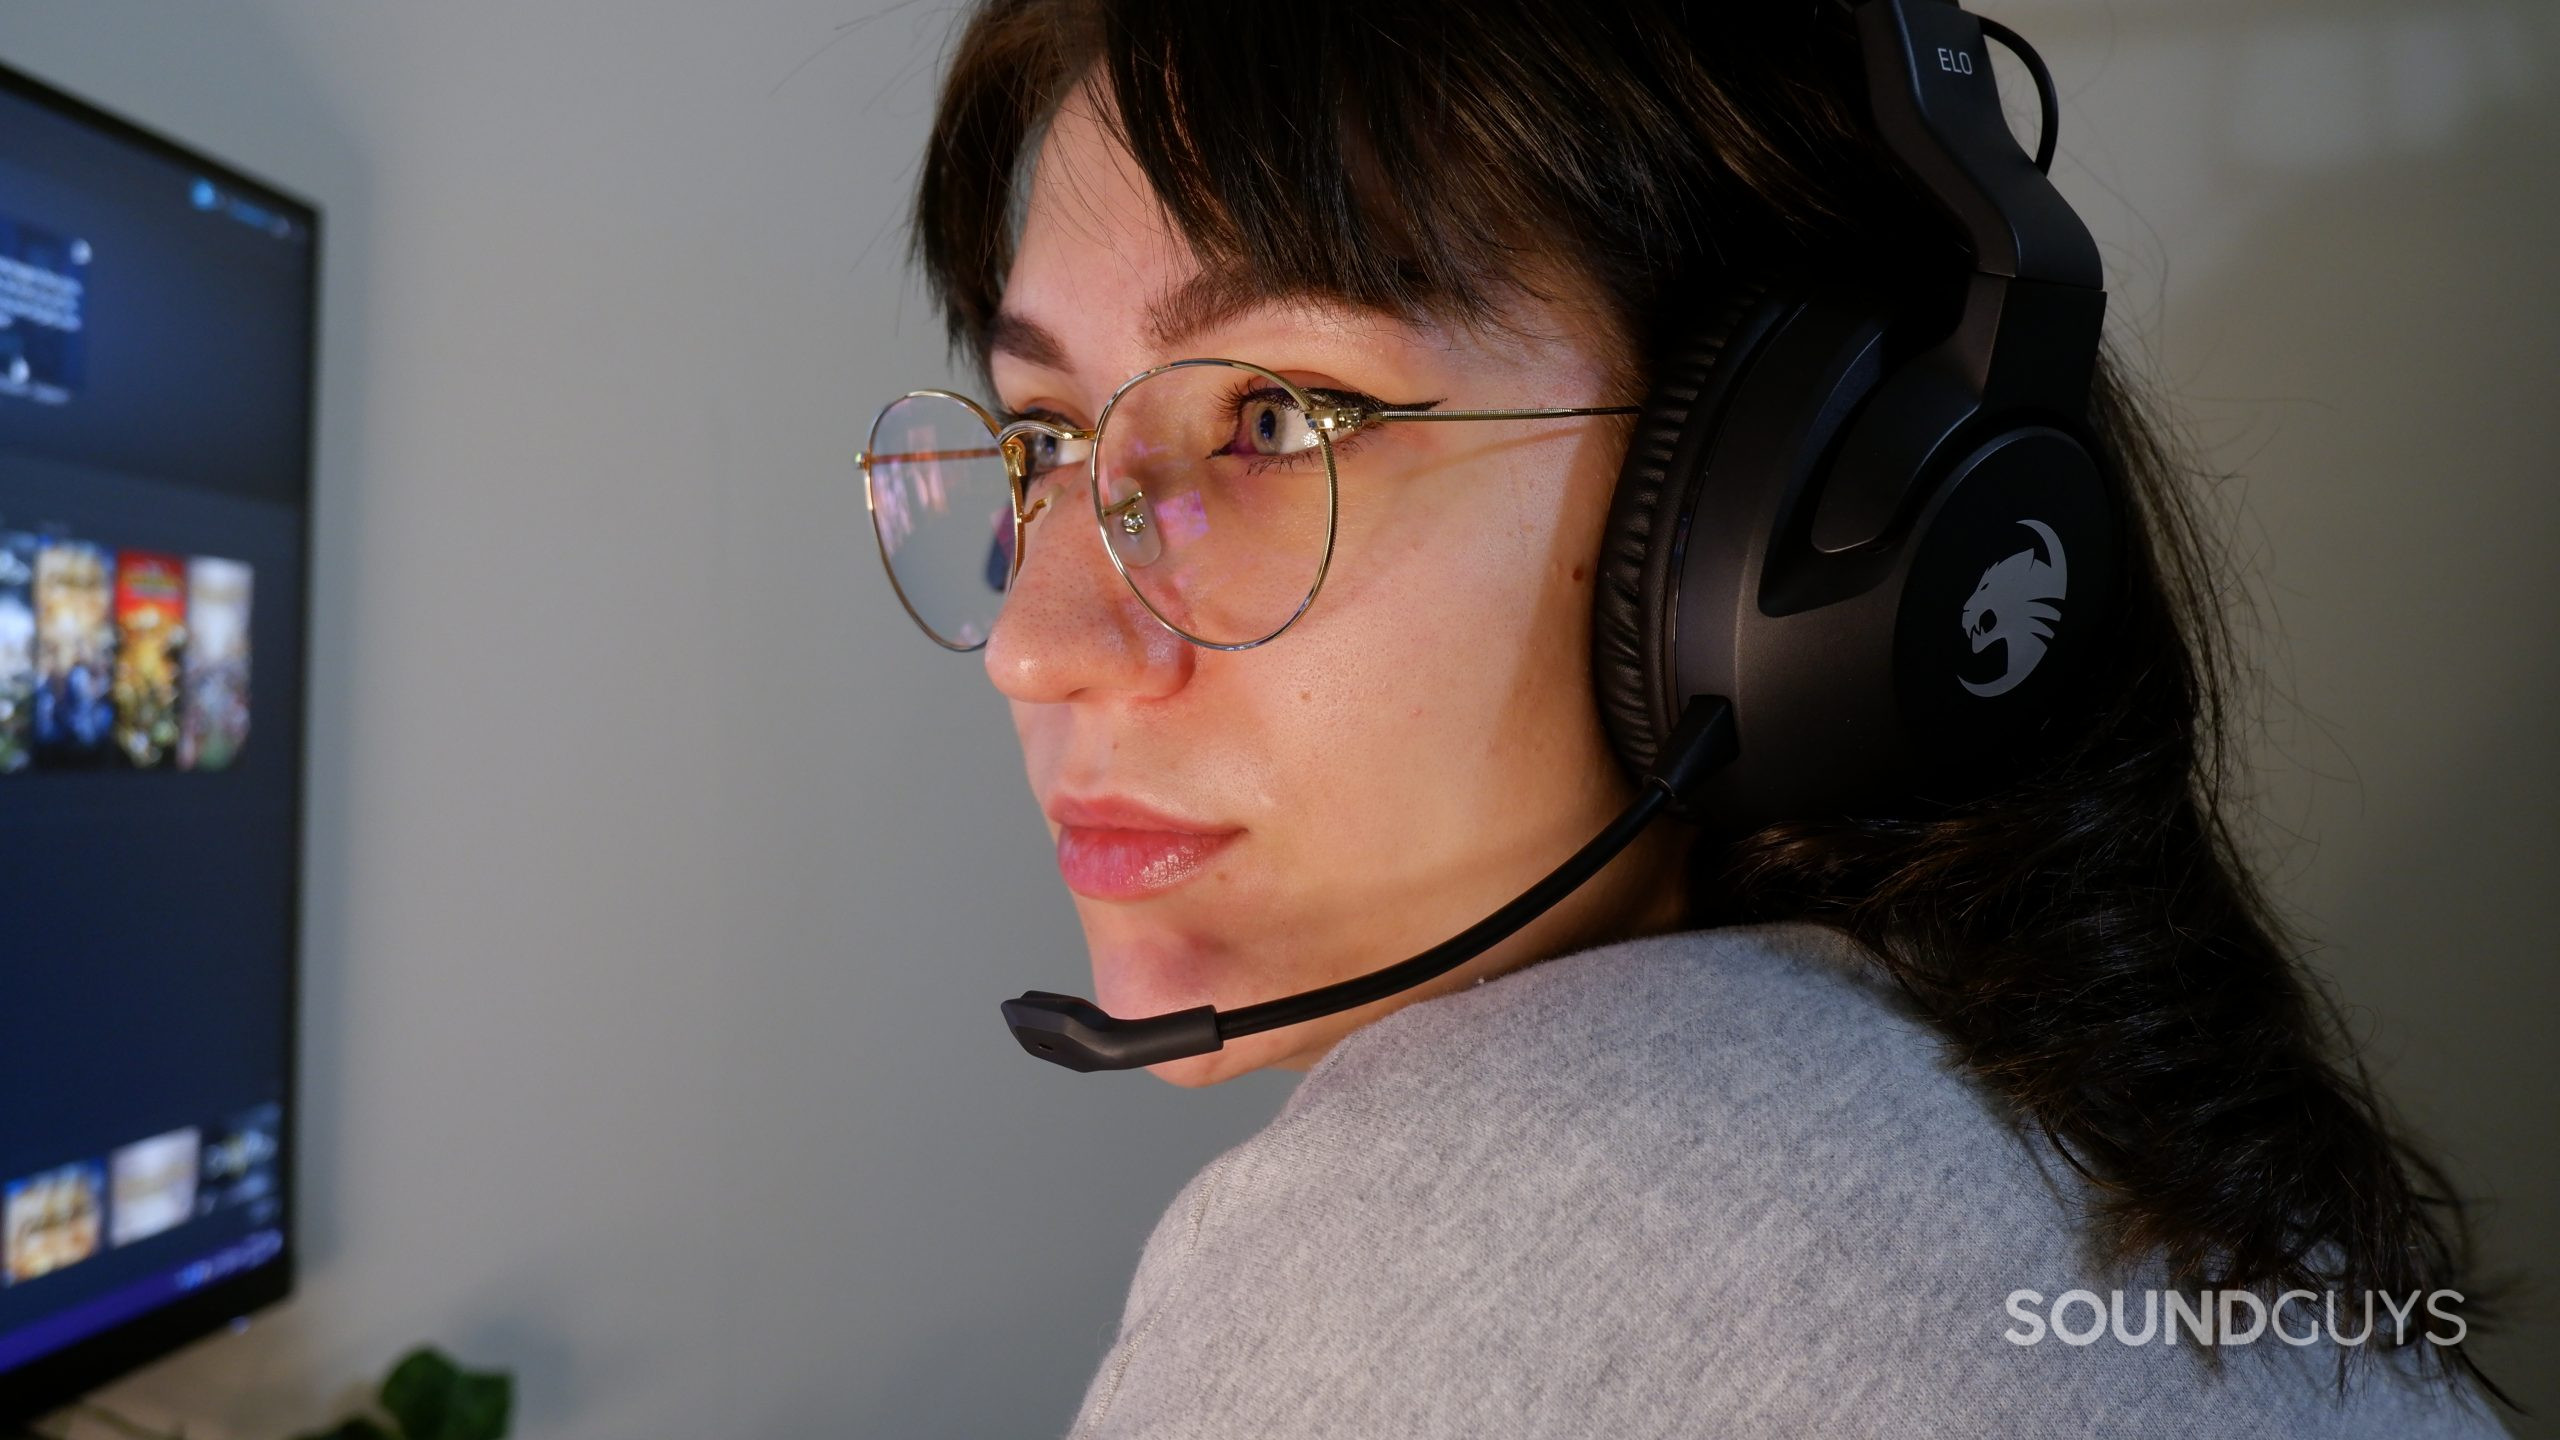 The ROCCAT Elo X Stereo headset on a person's head, while they look at a computer screen.